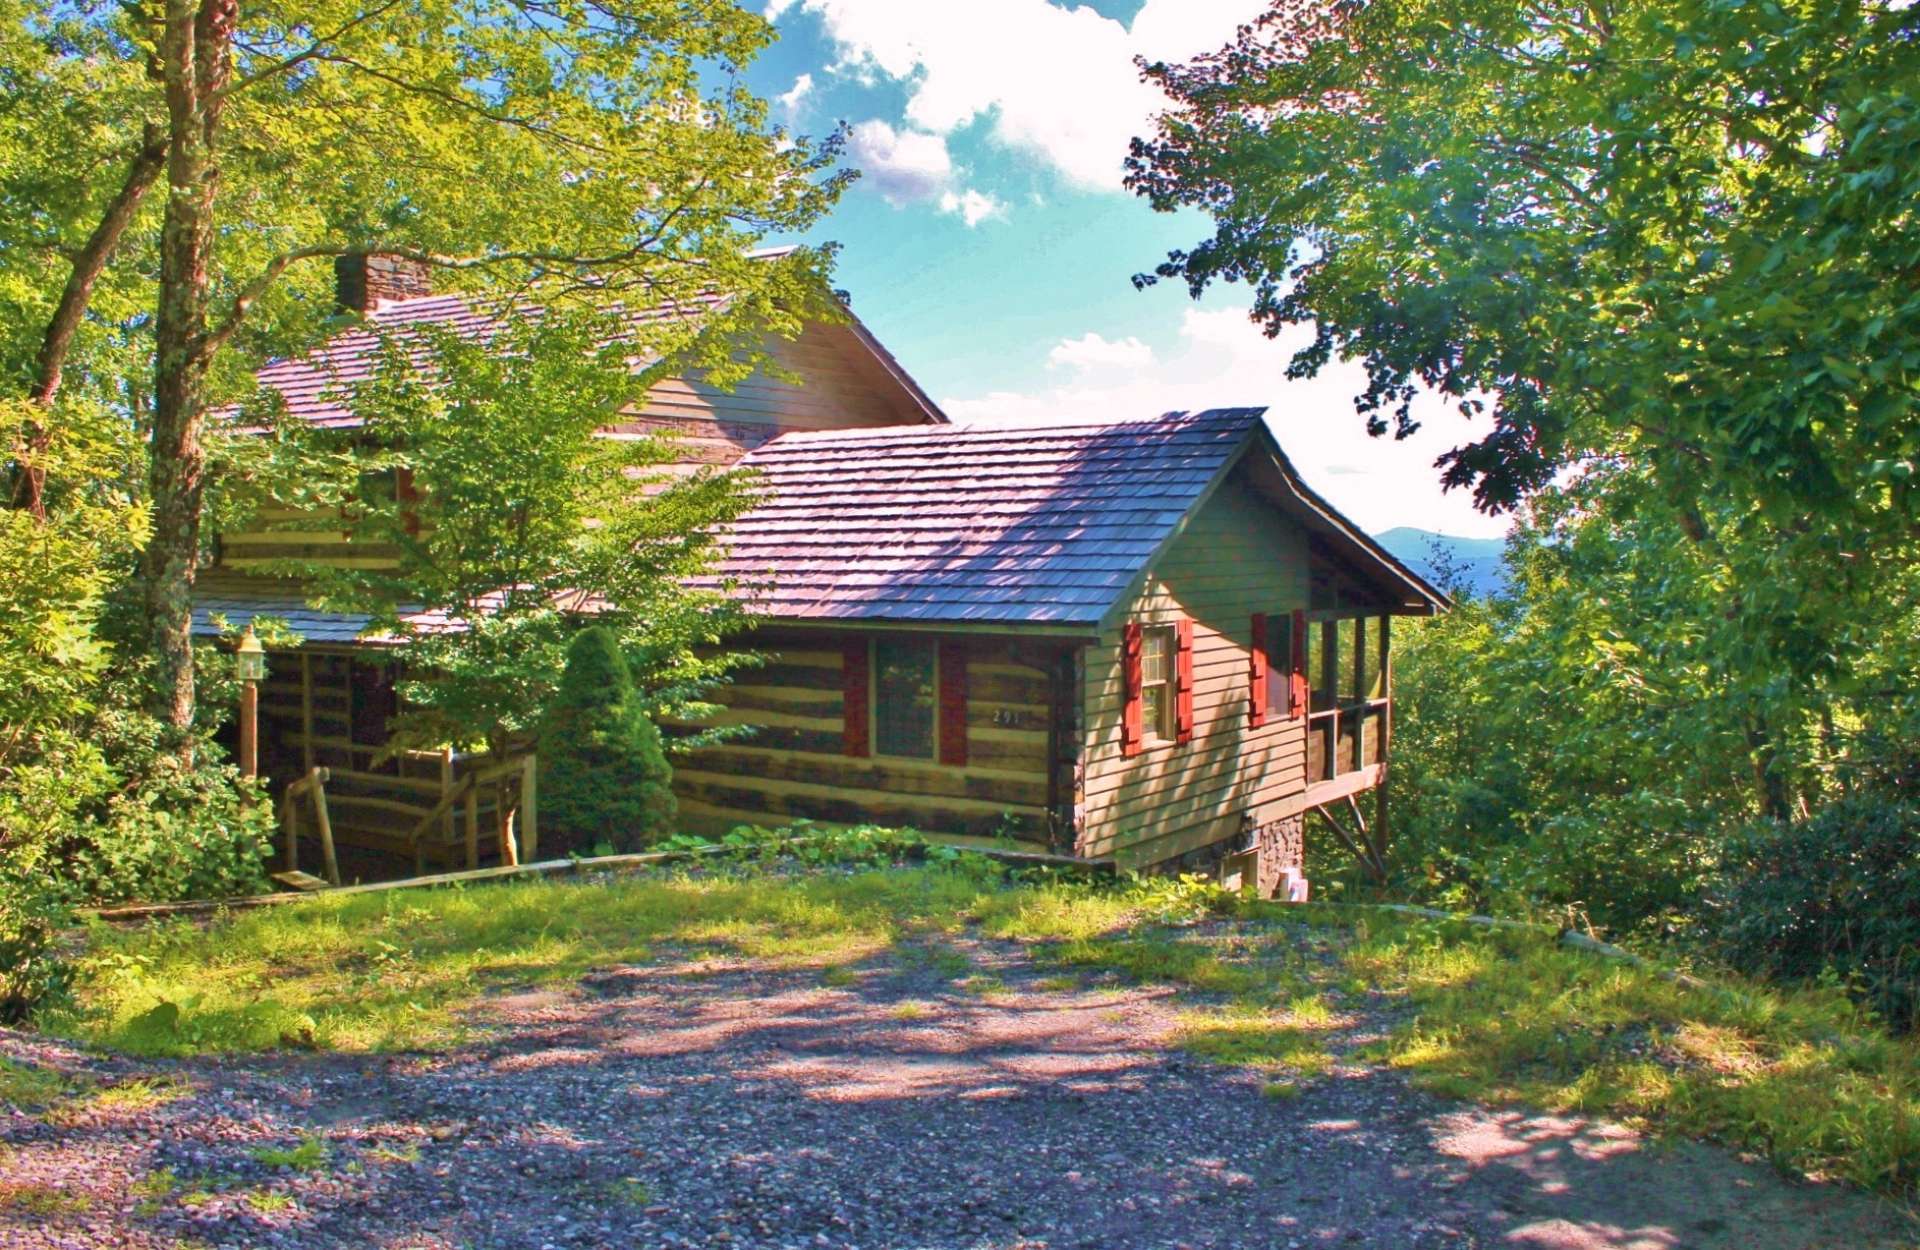 Offered at $314,900, this charming antique Stonebridge log cabin is sure to please those looking for a unique community and a rustic log cabin with high elevations and superb layered long range mountain views.